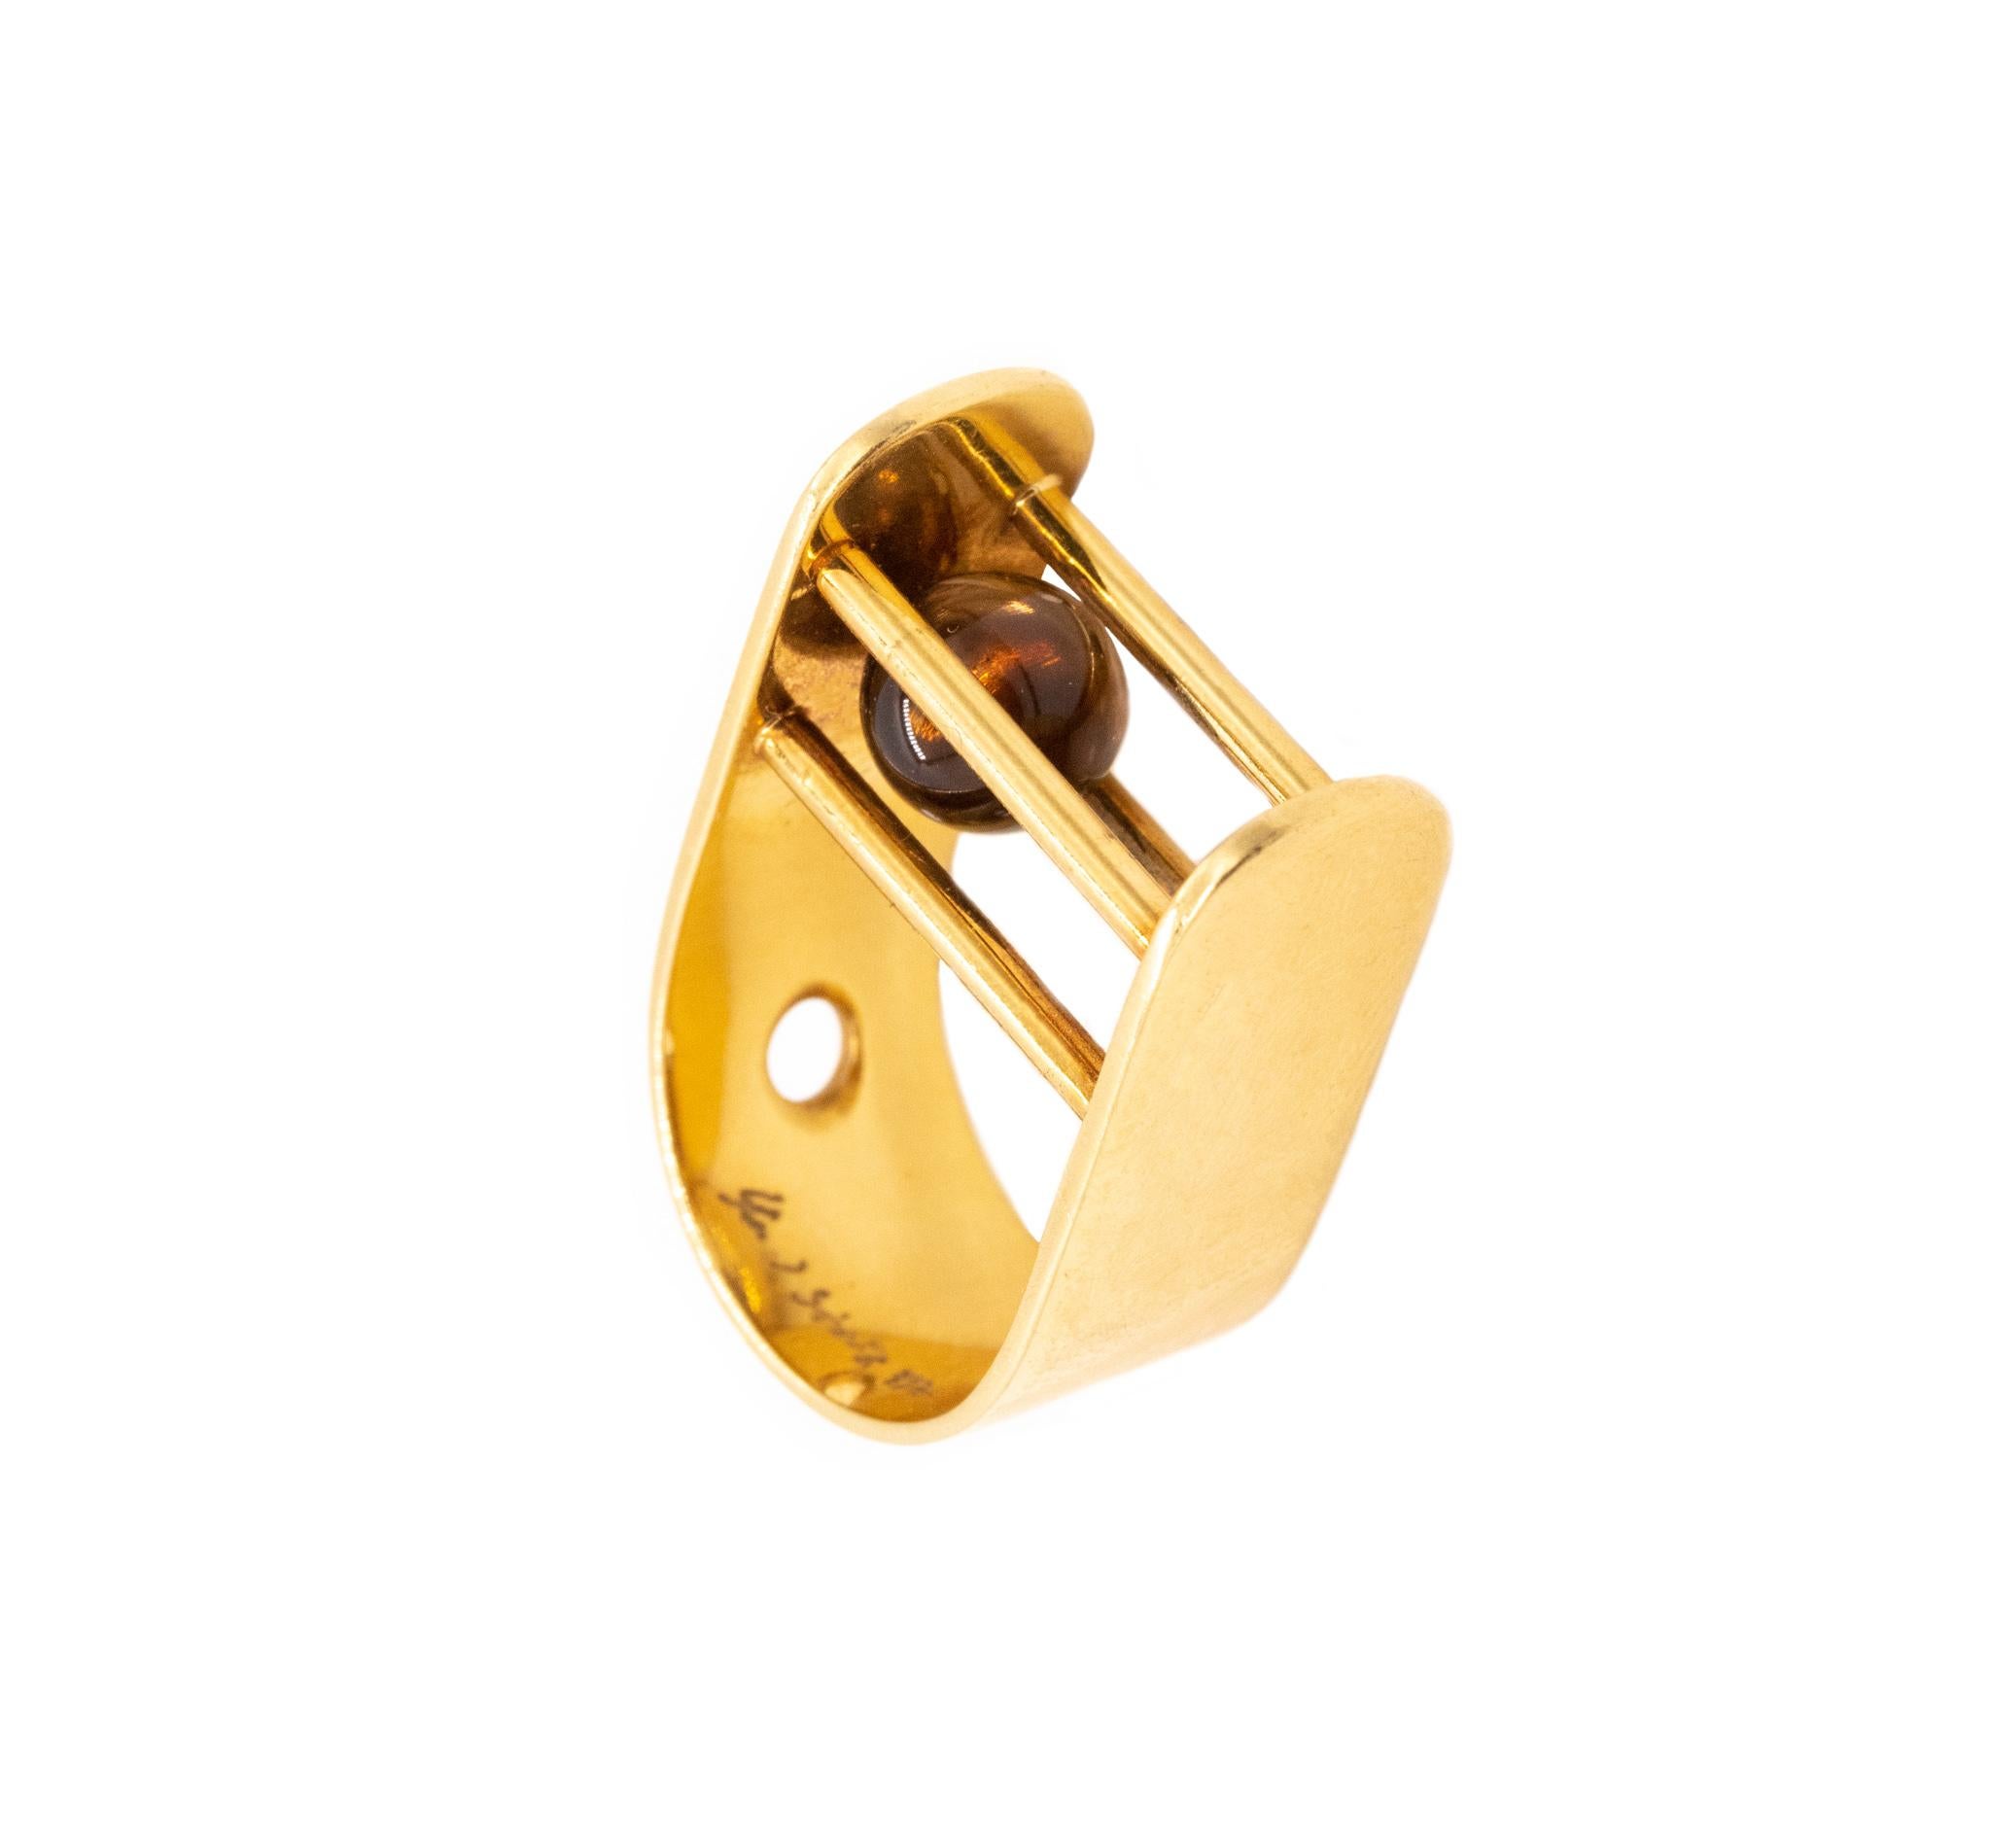 A kinetic ring designed by Yael Sonia.

This sculptural art-piece is crafted in 18k solid yellow gold, with a high polished finish. The design is composed by an U-shaped element with four pins that hold a sphere carved from natural translucent